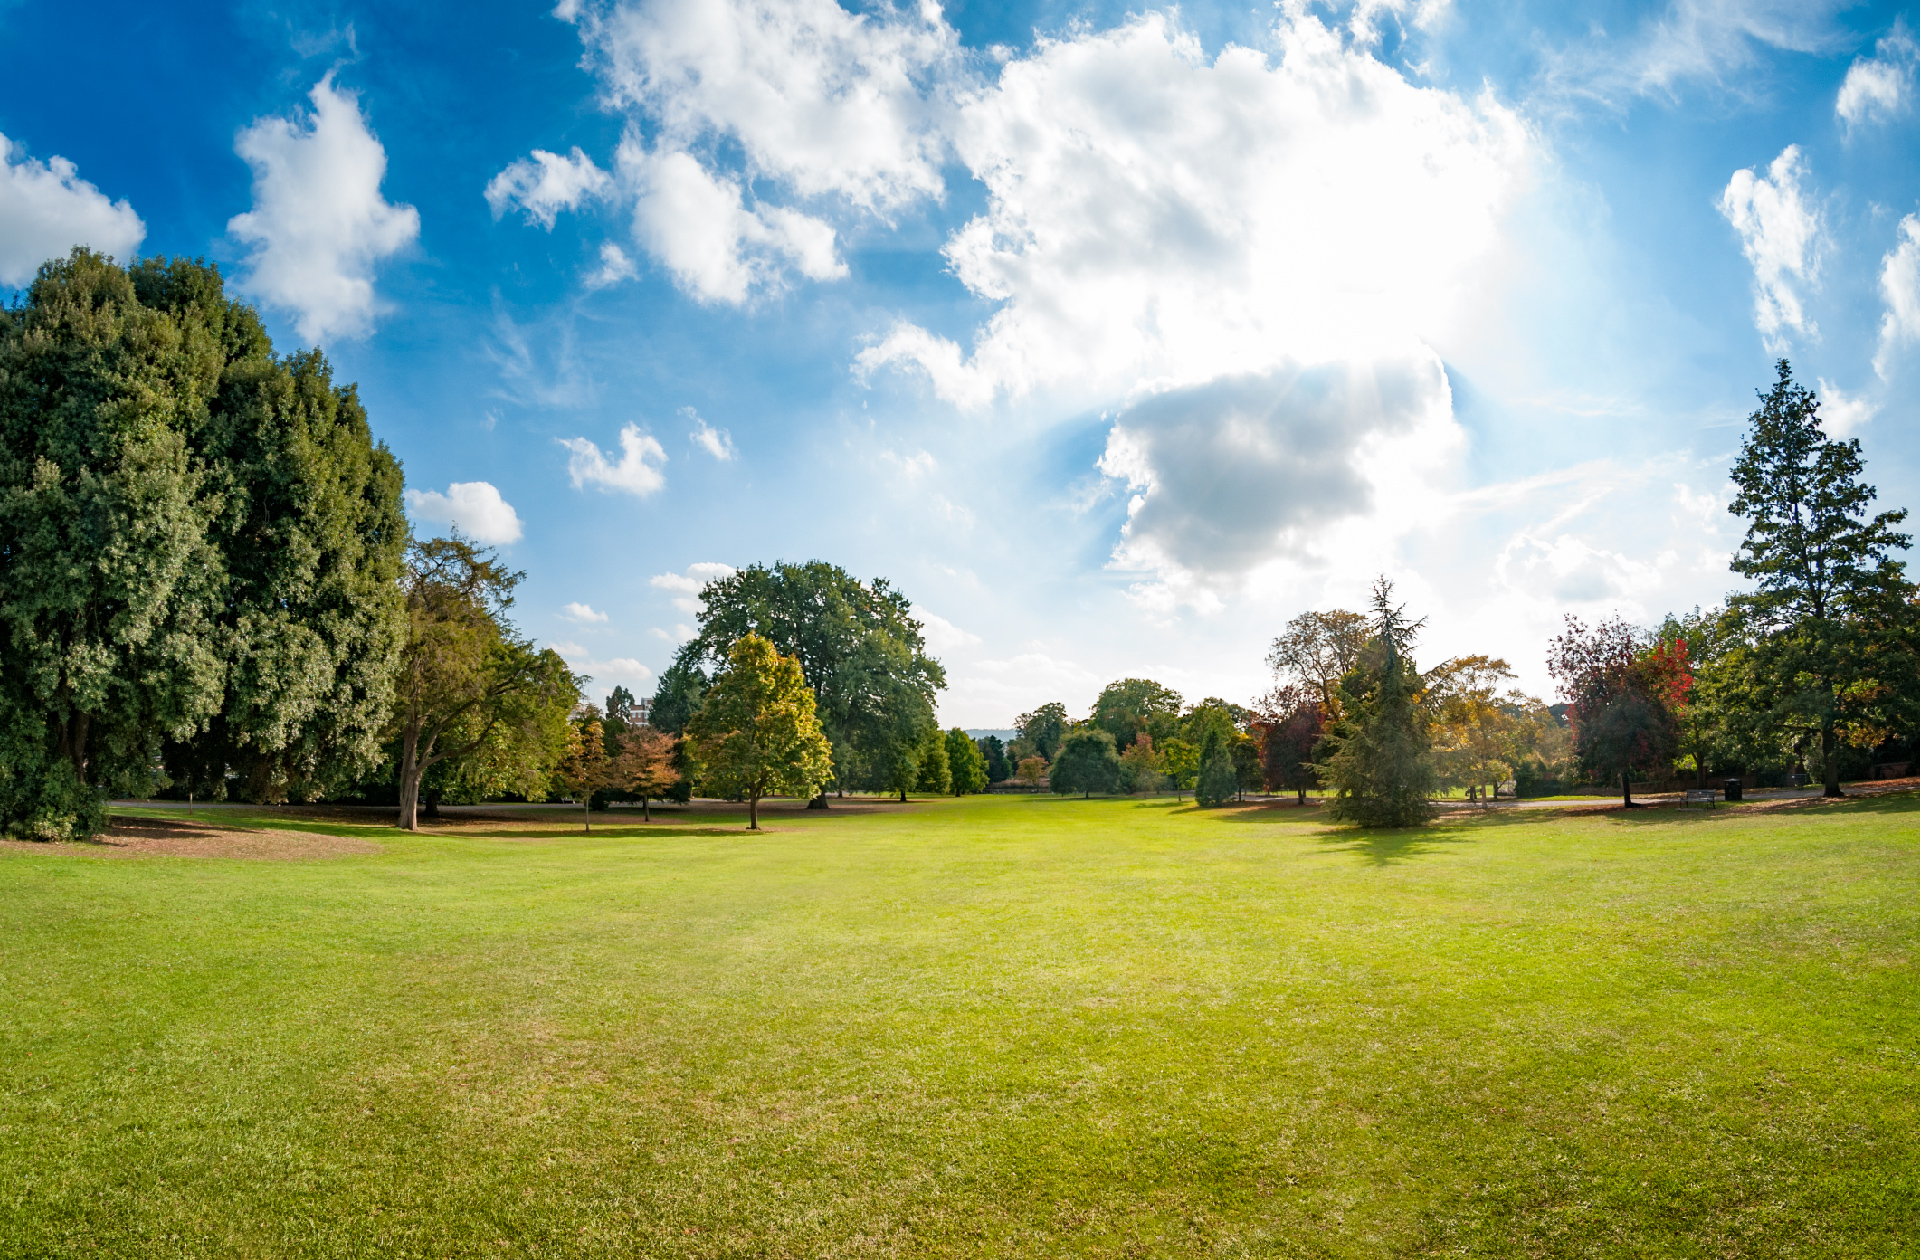 How local authorities can protect and maintain green spaces now - and through the recovery